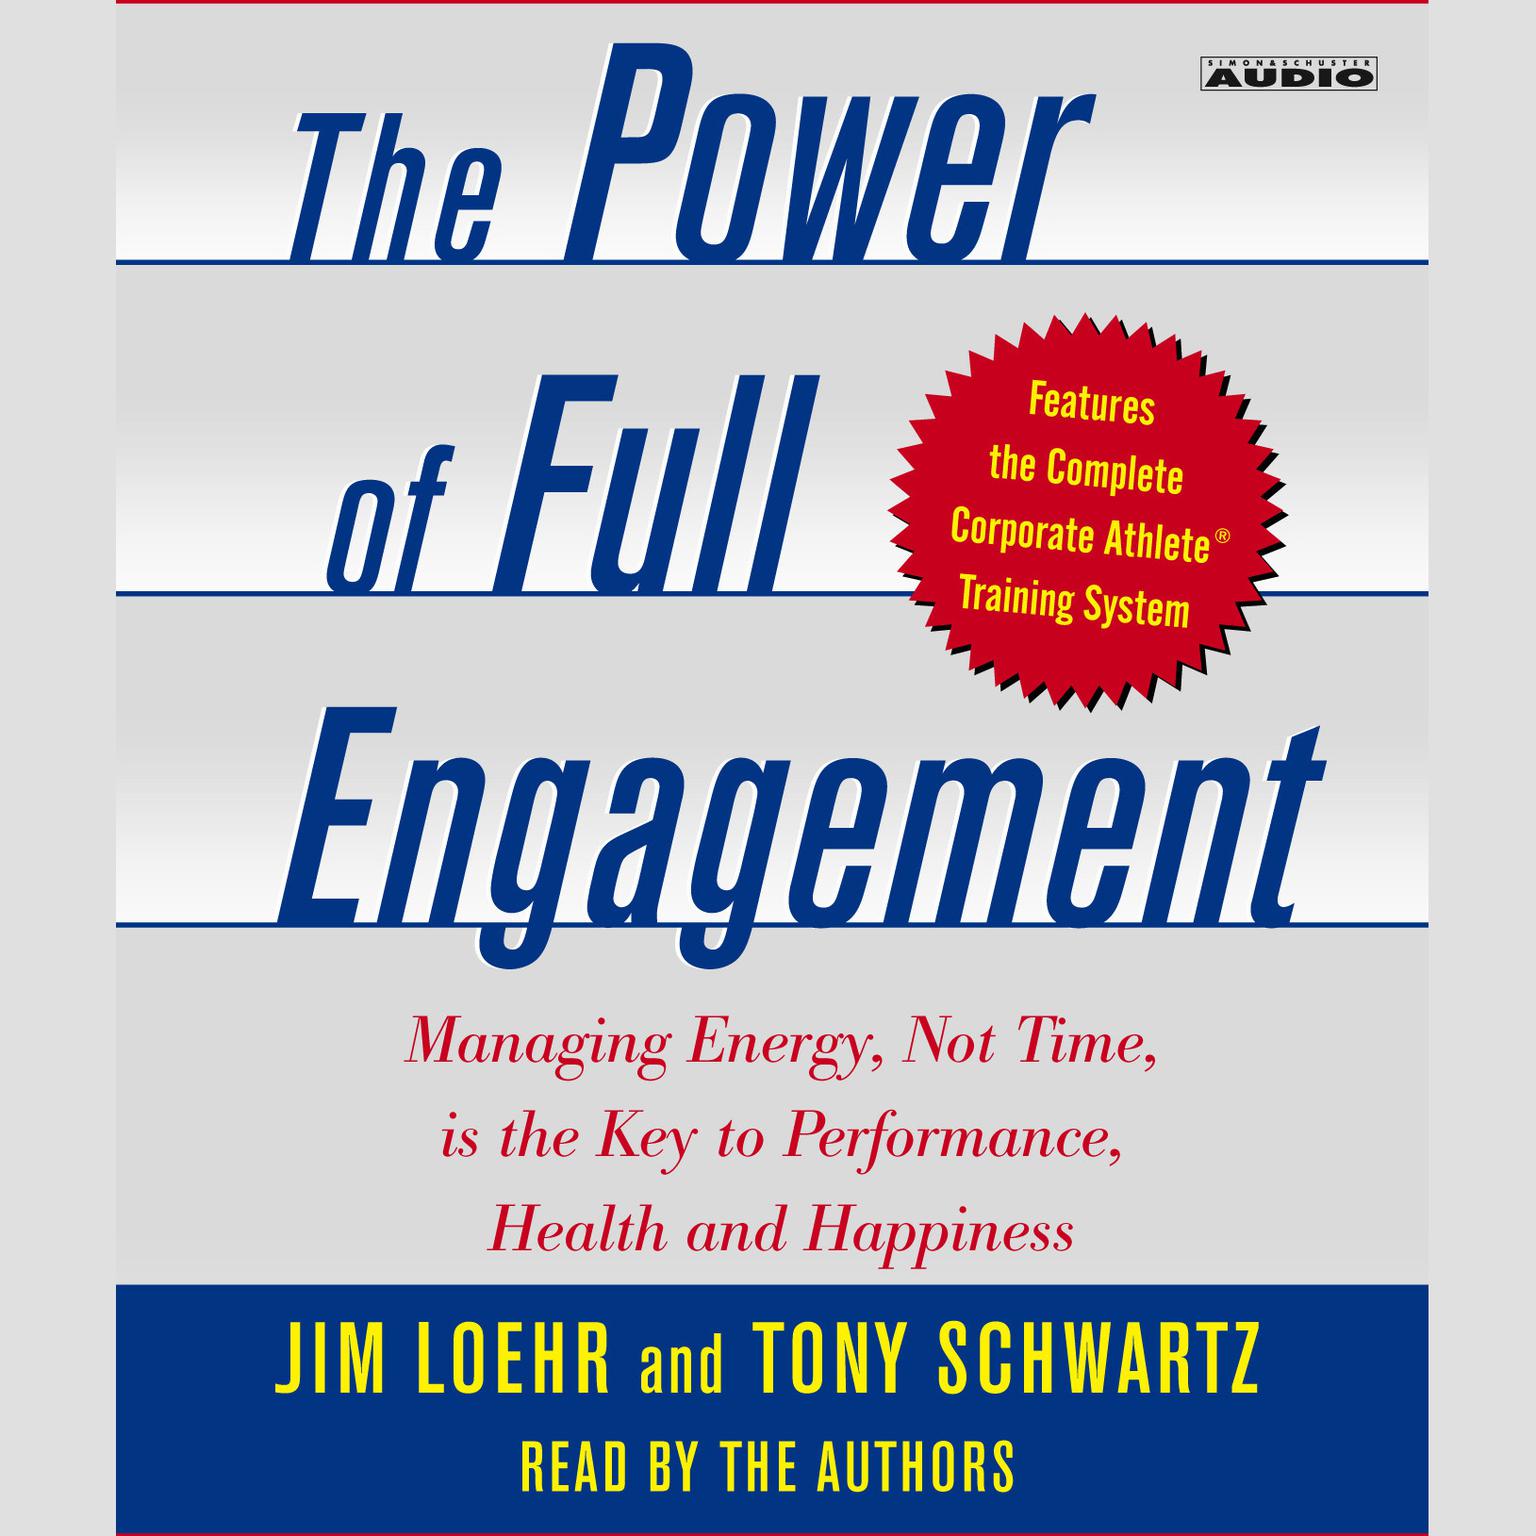 The Power of Full Engagement (Abridged): Managing Energy, Not Time, is the Key to High Performance and Personal Renewal Audiobook, by Jim Loehr